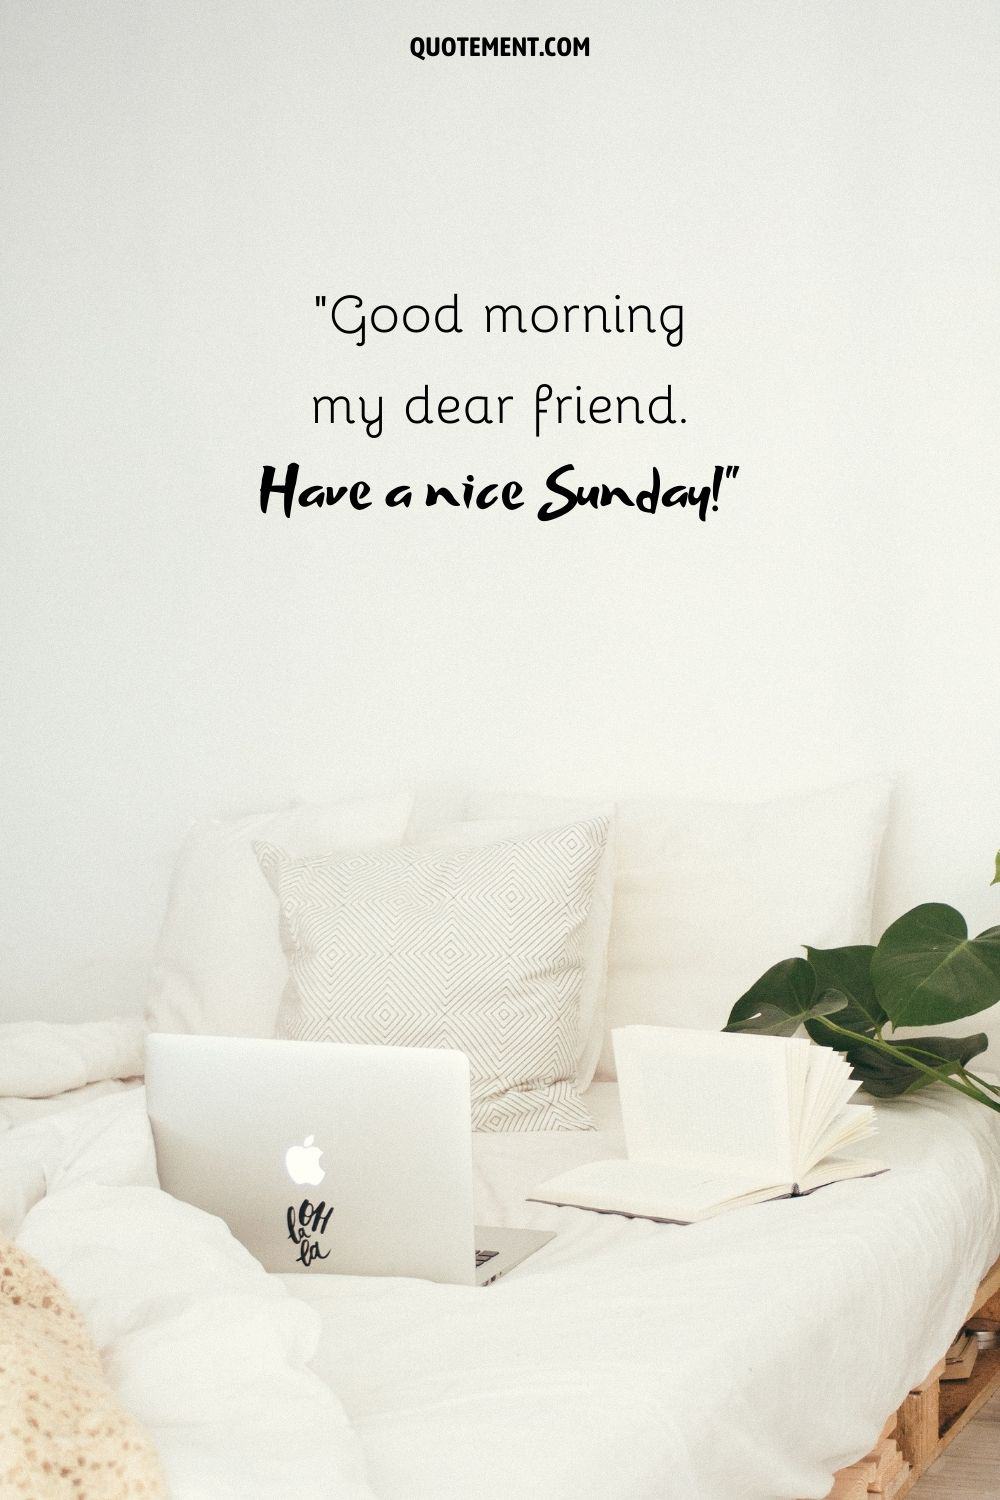 drinking coffe and working in bed representing good morning friend message